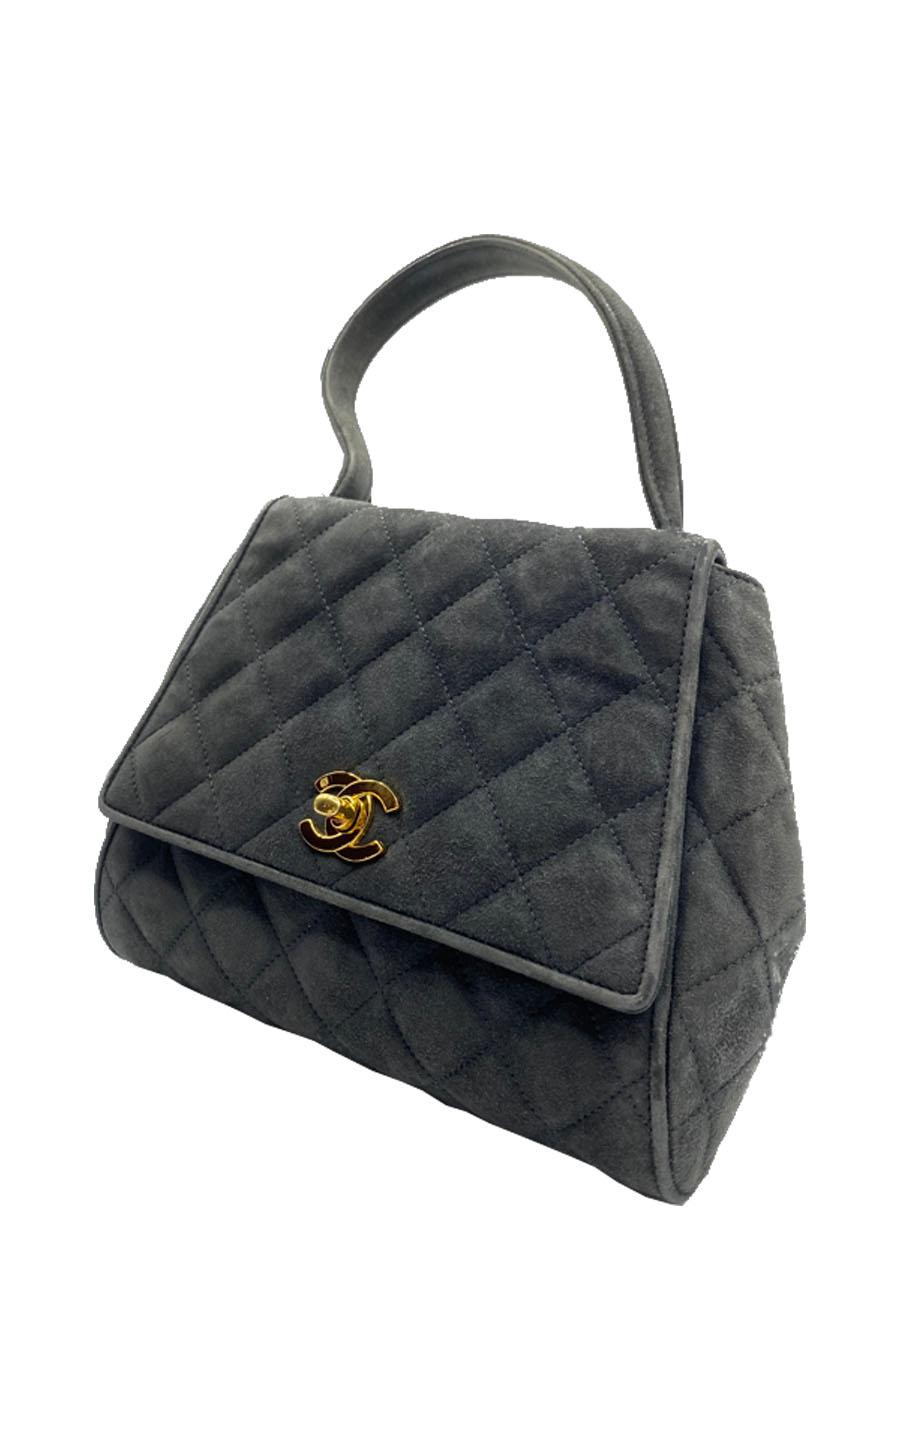 Chanel Timeless handbag in beige quilted leather

Condition : Very good condition 
Collection : Circa 1995
Model : Chanel mini top handle 
Gender : Ladies
Color : Grey and gold turnlock
Material : Suede 
Length : 20 cm
Height : 21 cm
Width : 7